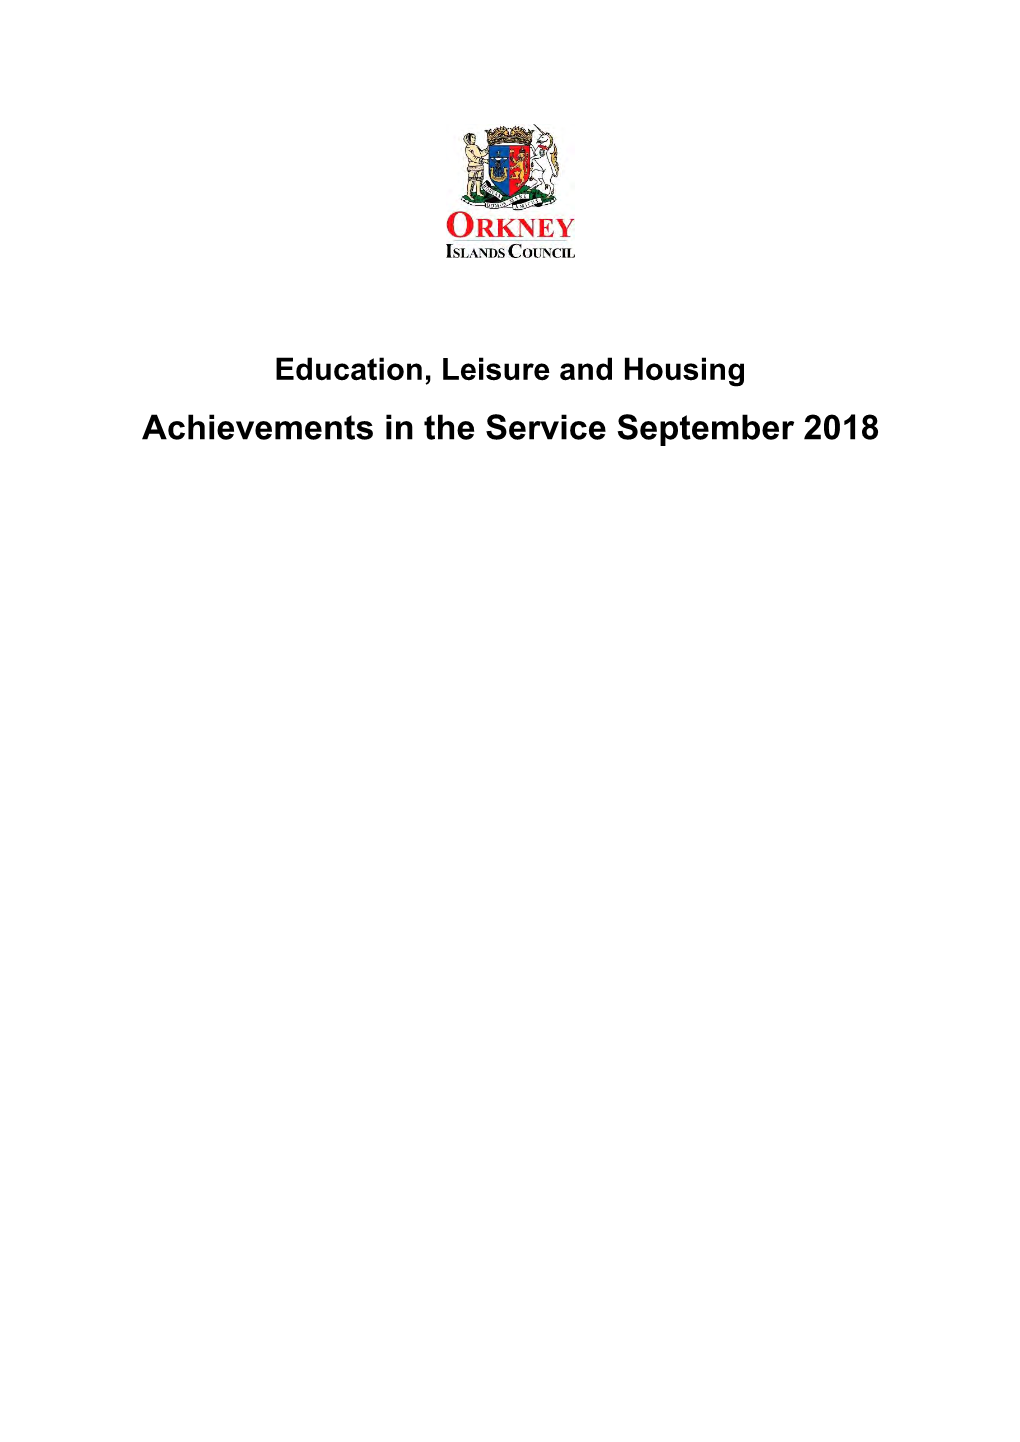 Achievements in the Service September 2018